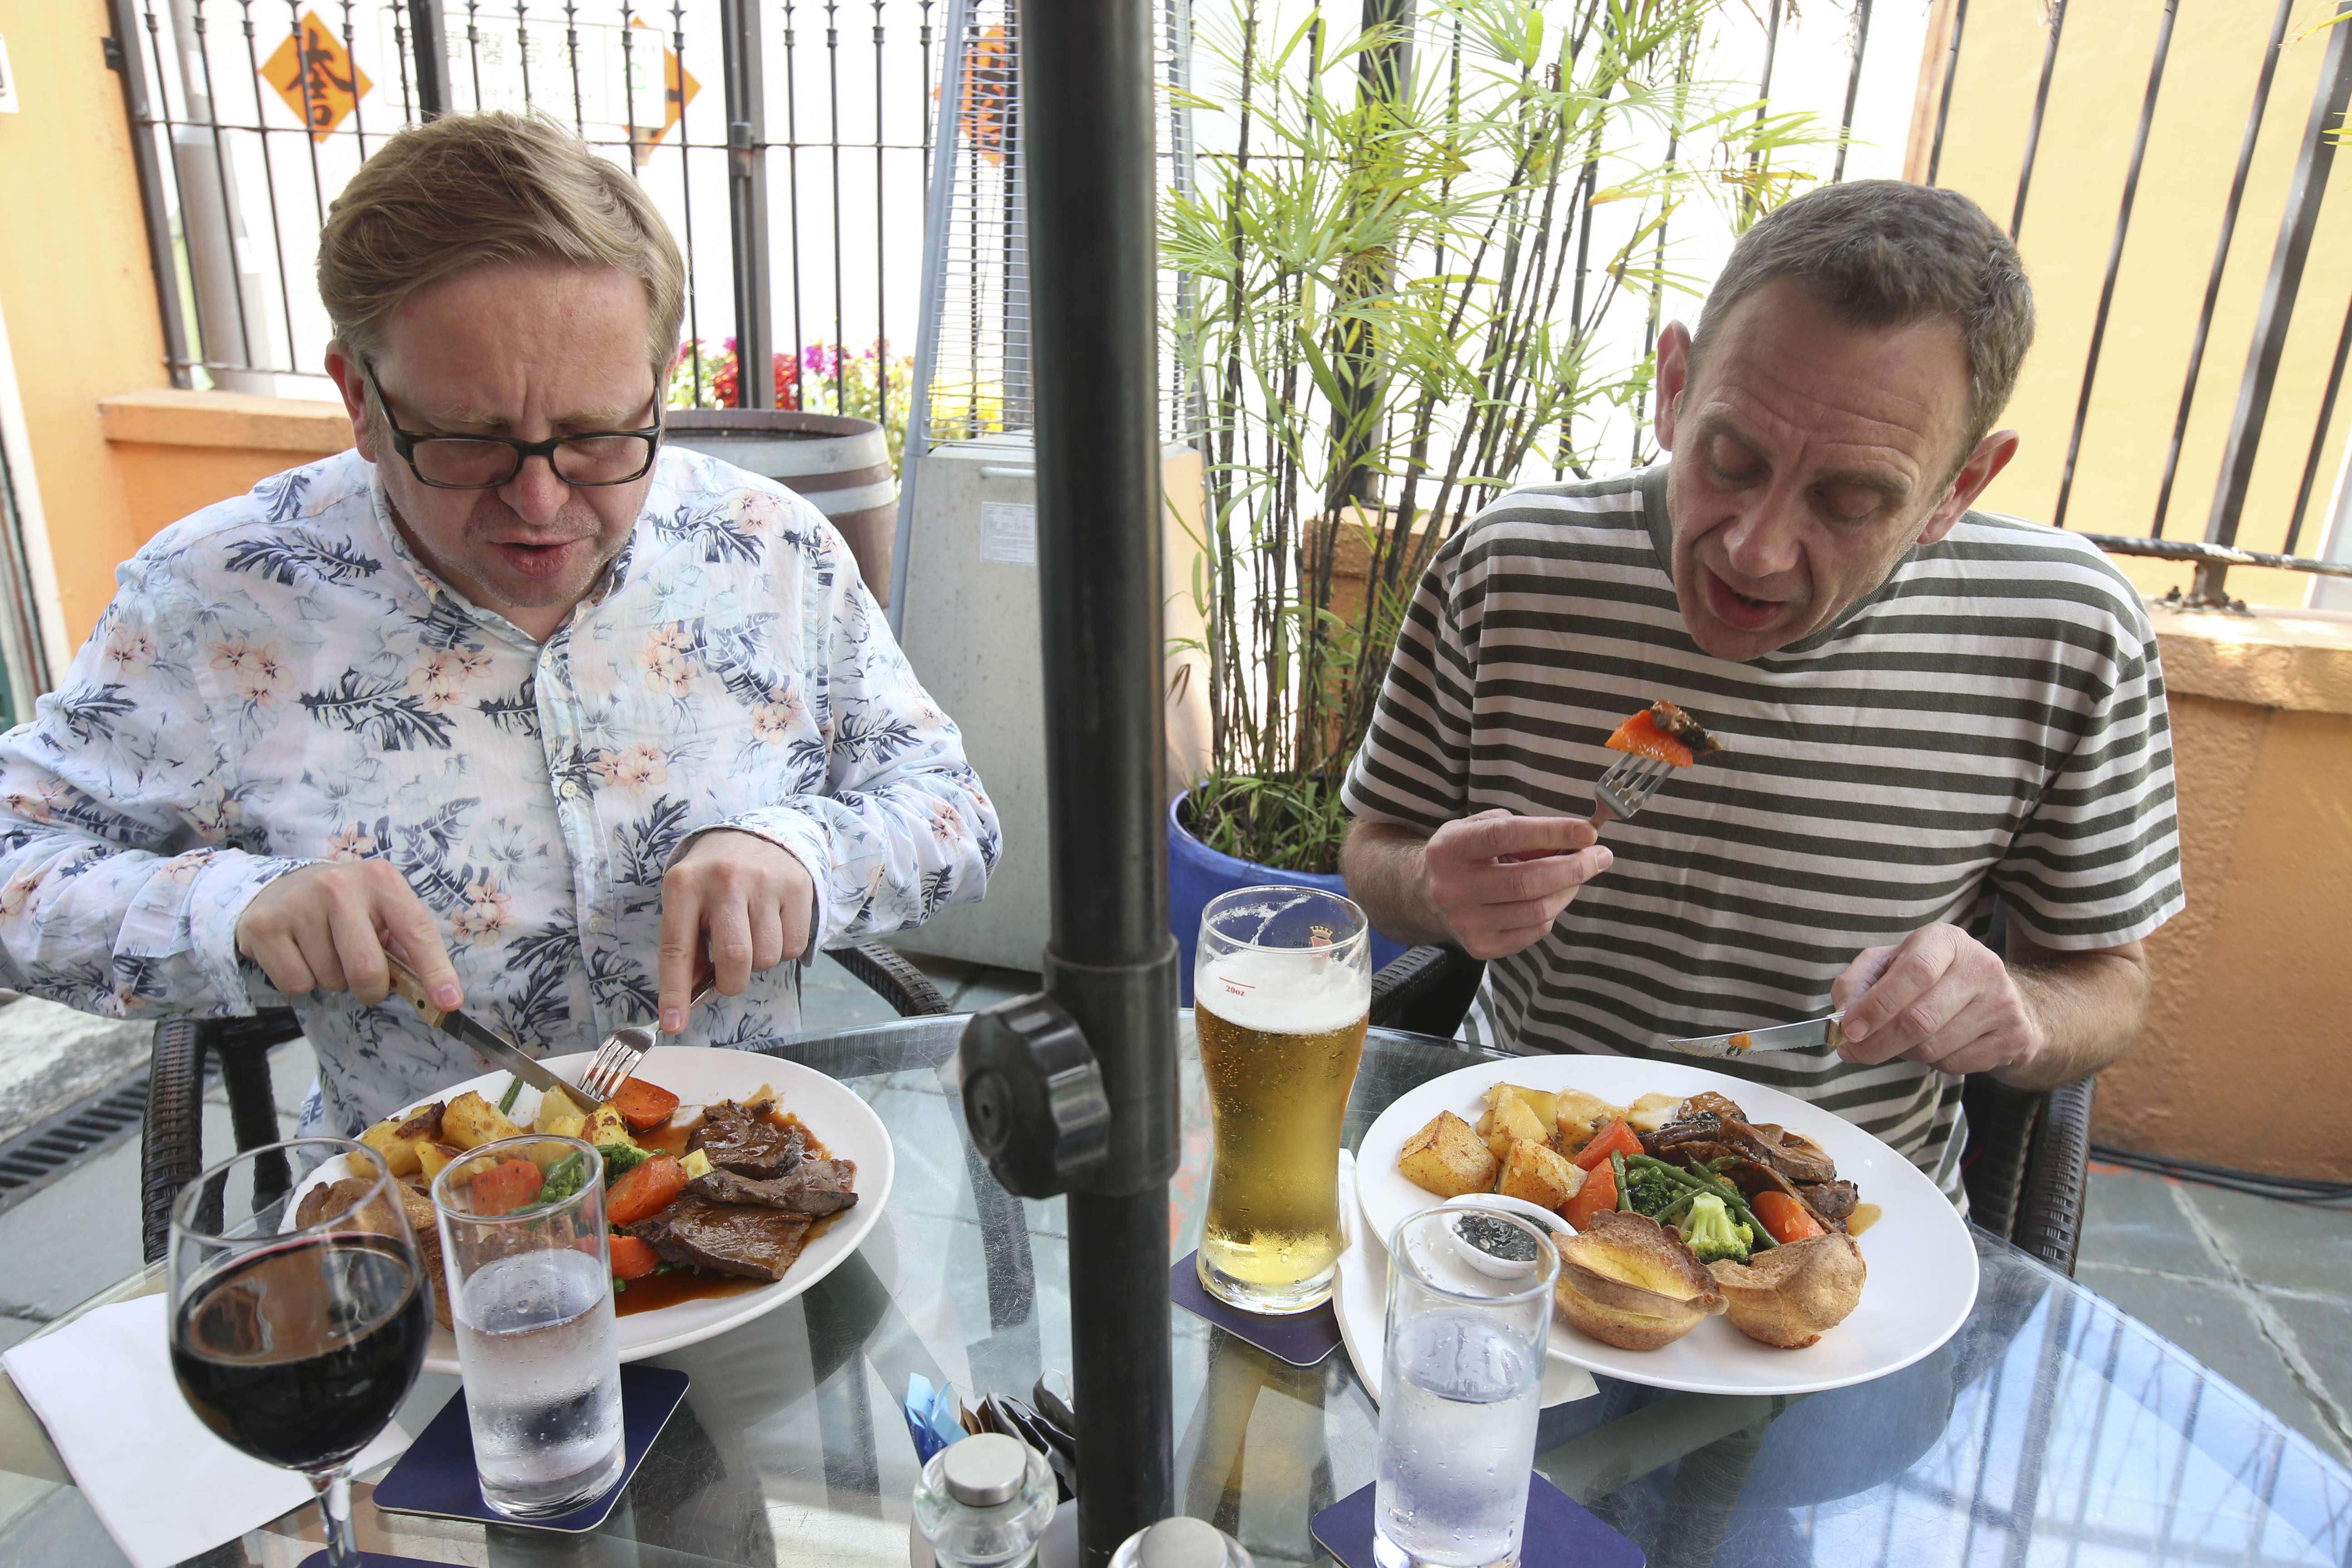 The Post’s Kevin McCardle (left) tucks into roast beef, while Mark Sharp samples the roast lamb at Steamers in Sai Kung. Photo: David Wong